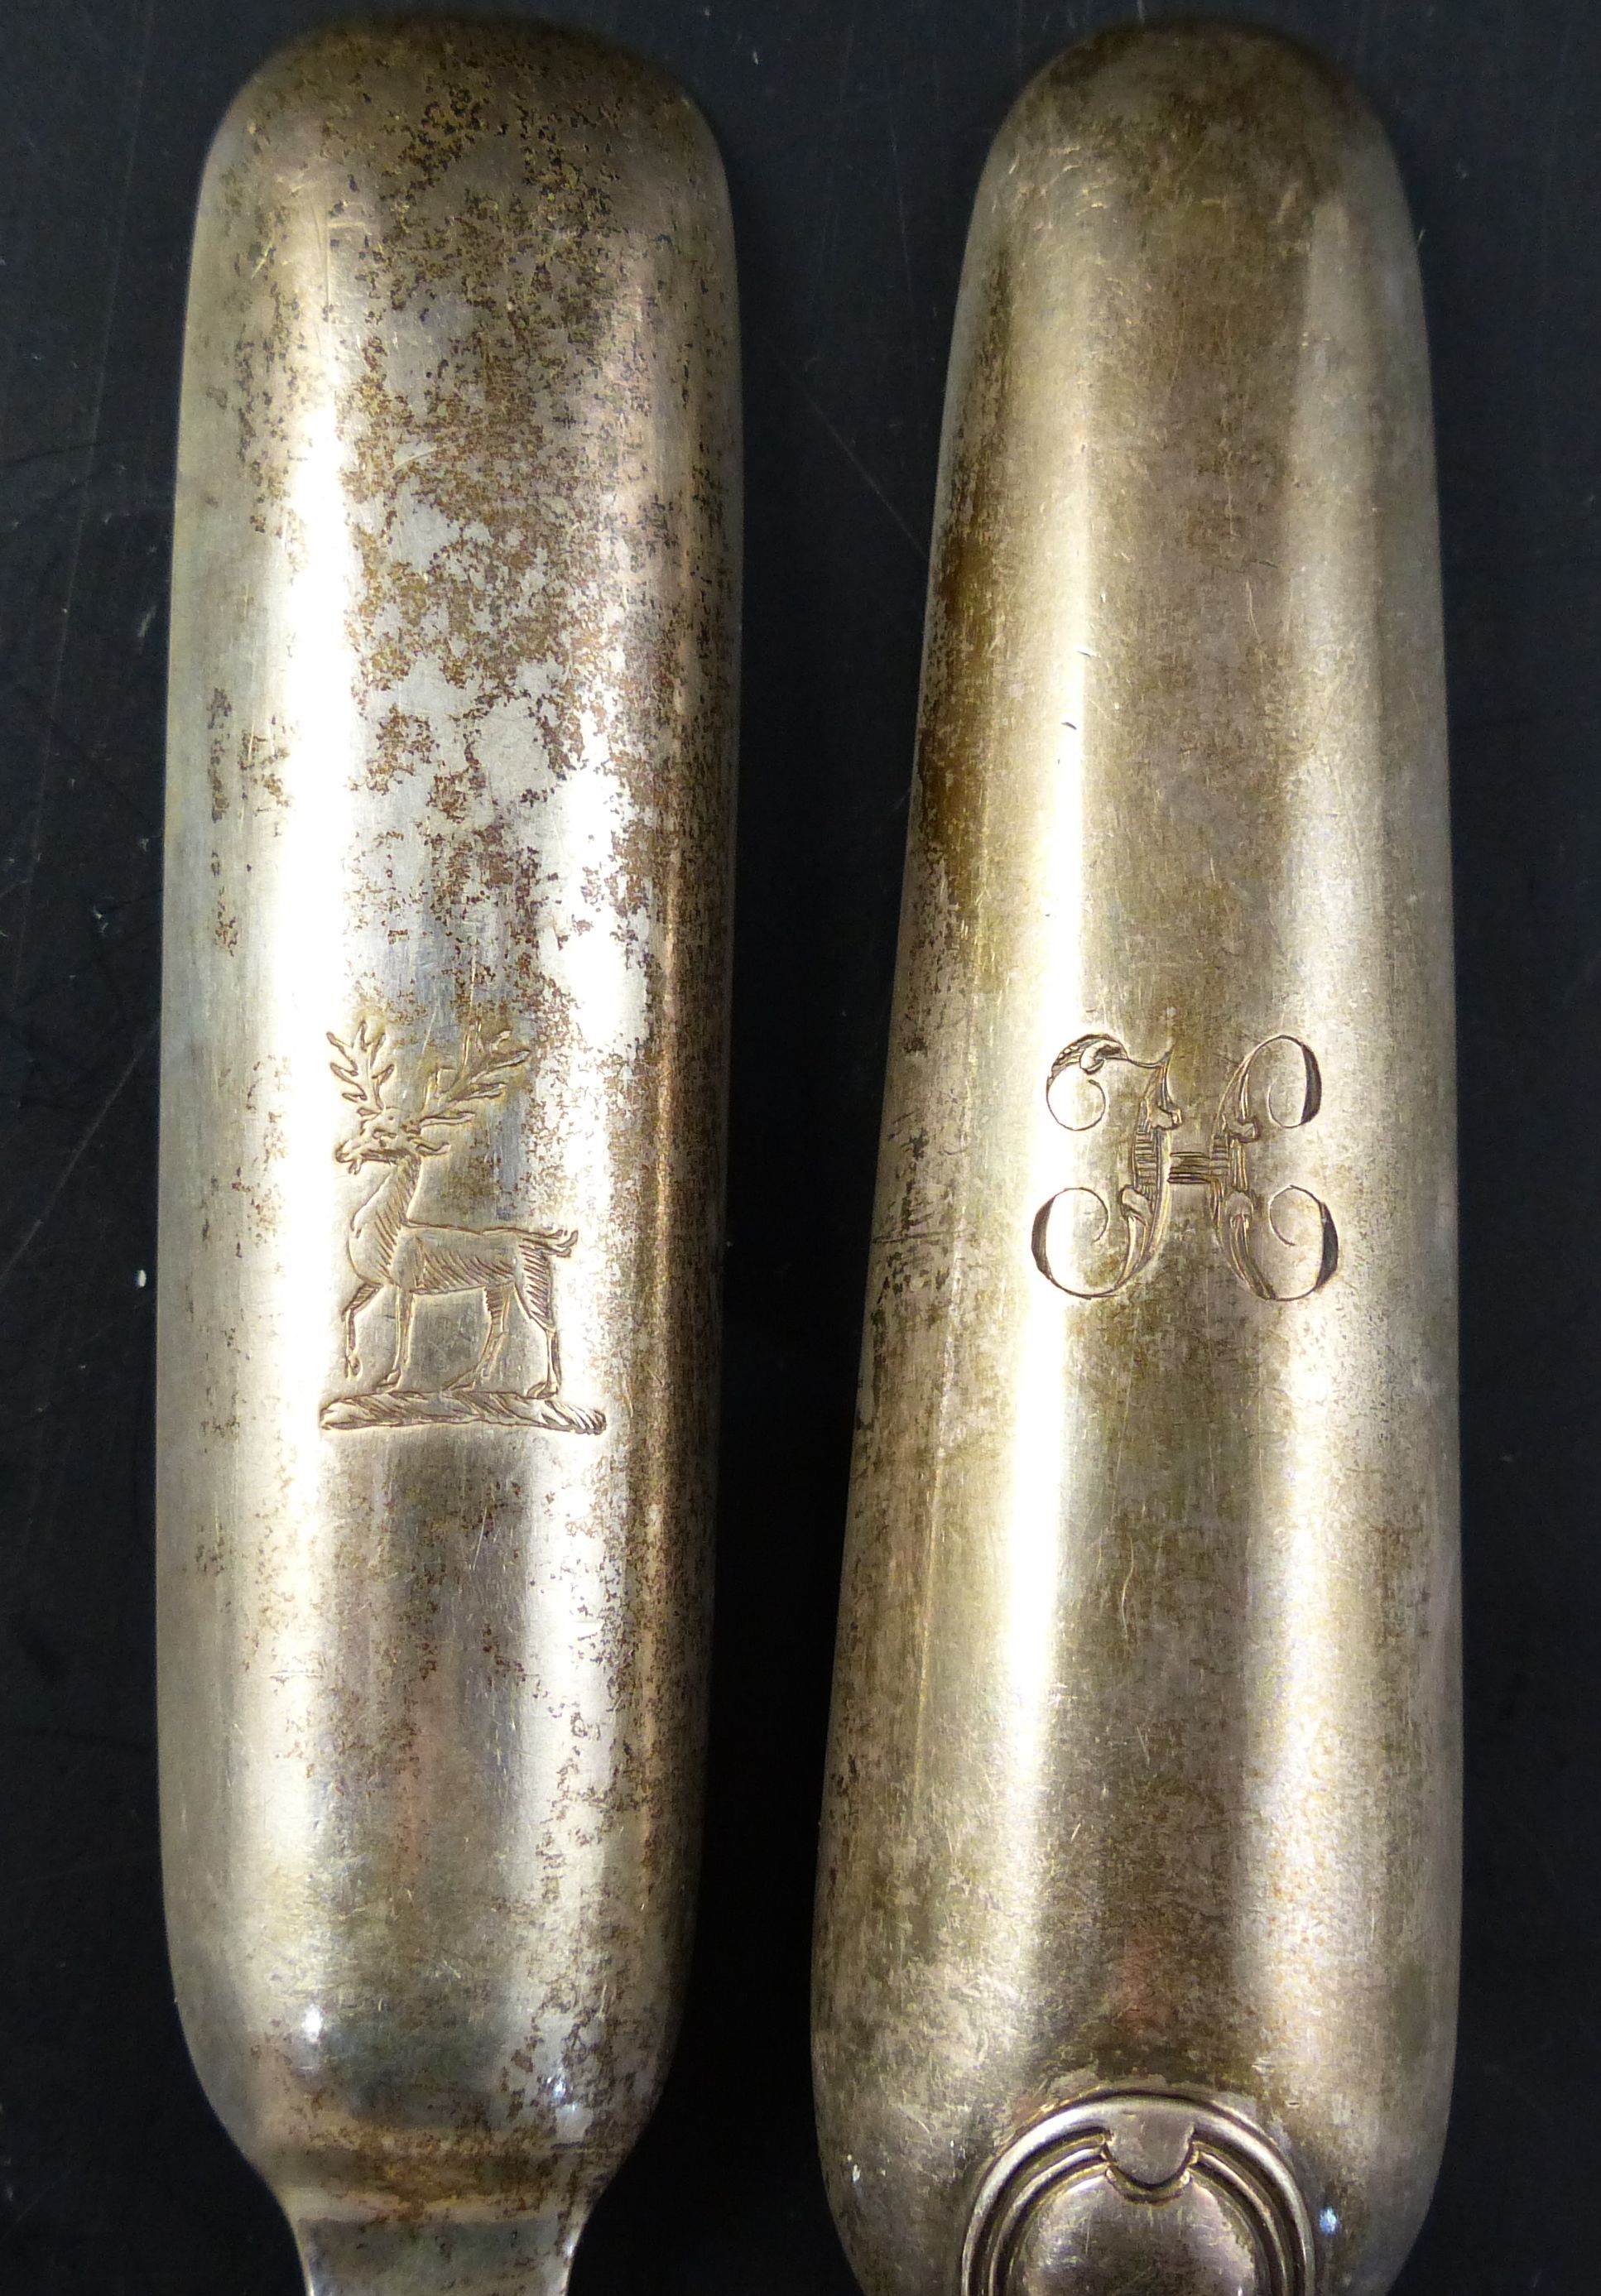 Two 19th century silver marrow scoops, thread pattern by Eley, Fearn & Chawner, London, 1808 and - Image 6 of 7